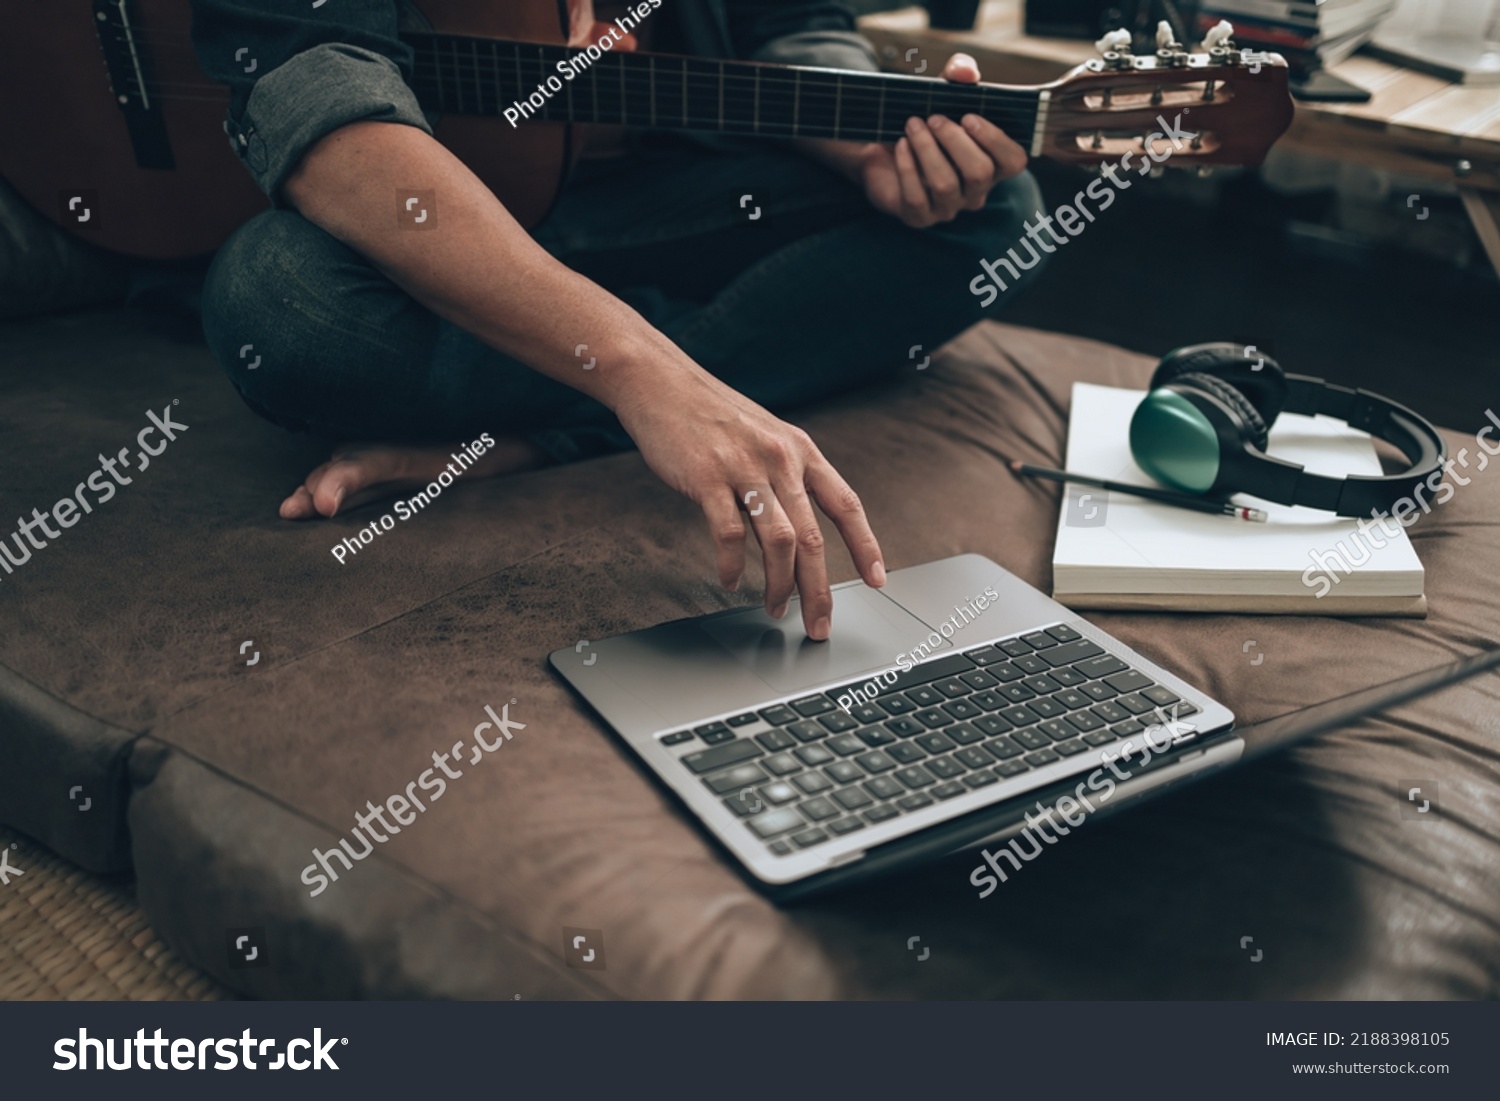 young man relax and playing guitar while sitting on sofa bed in living room at home. Music create melody song, lyrics on laptop and practice concept. #2188398105